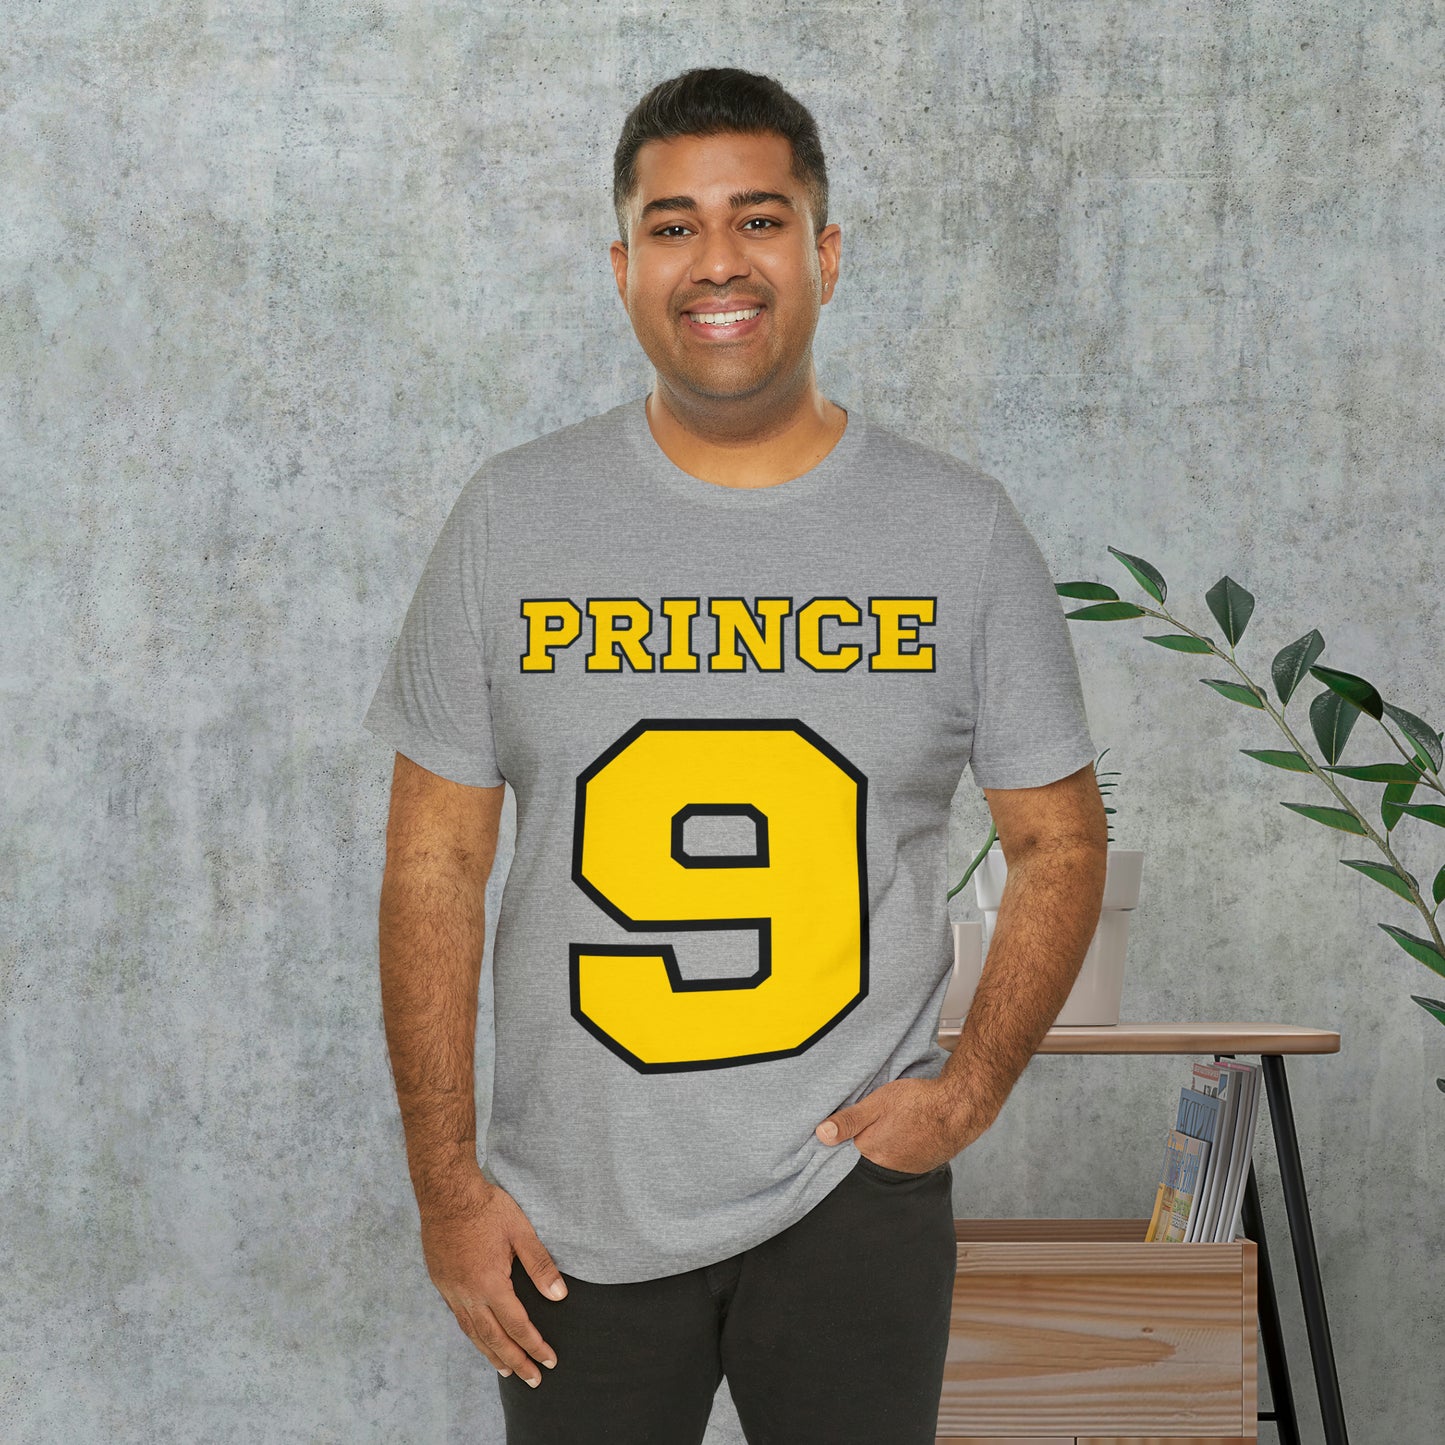 Match Made in Love:  Prince 9 - Sports-inspired Men's Tee, Winning Together